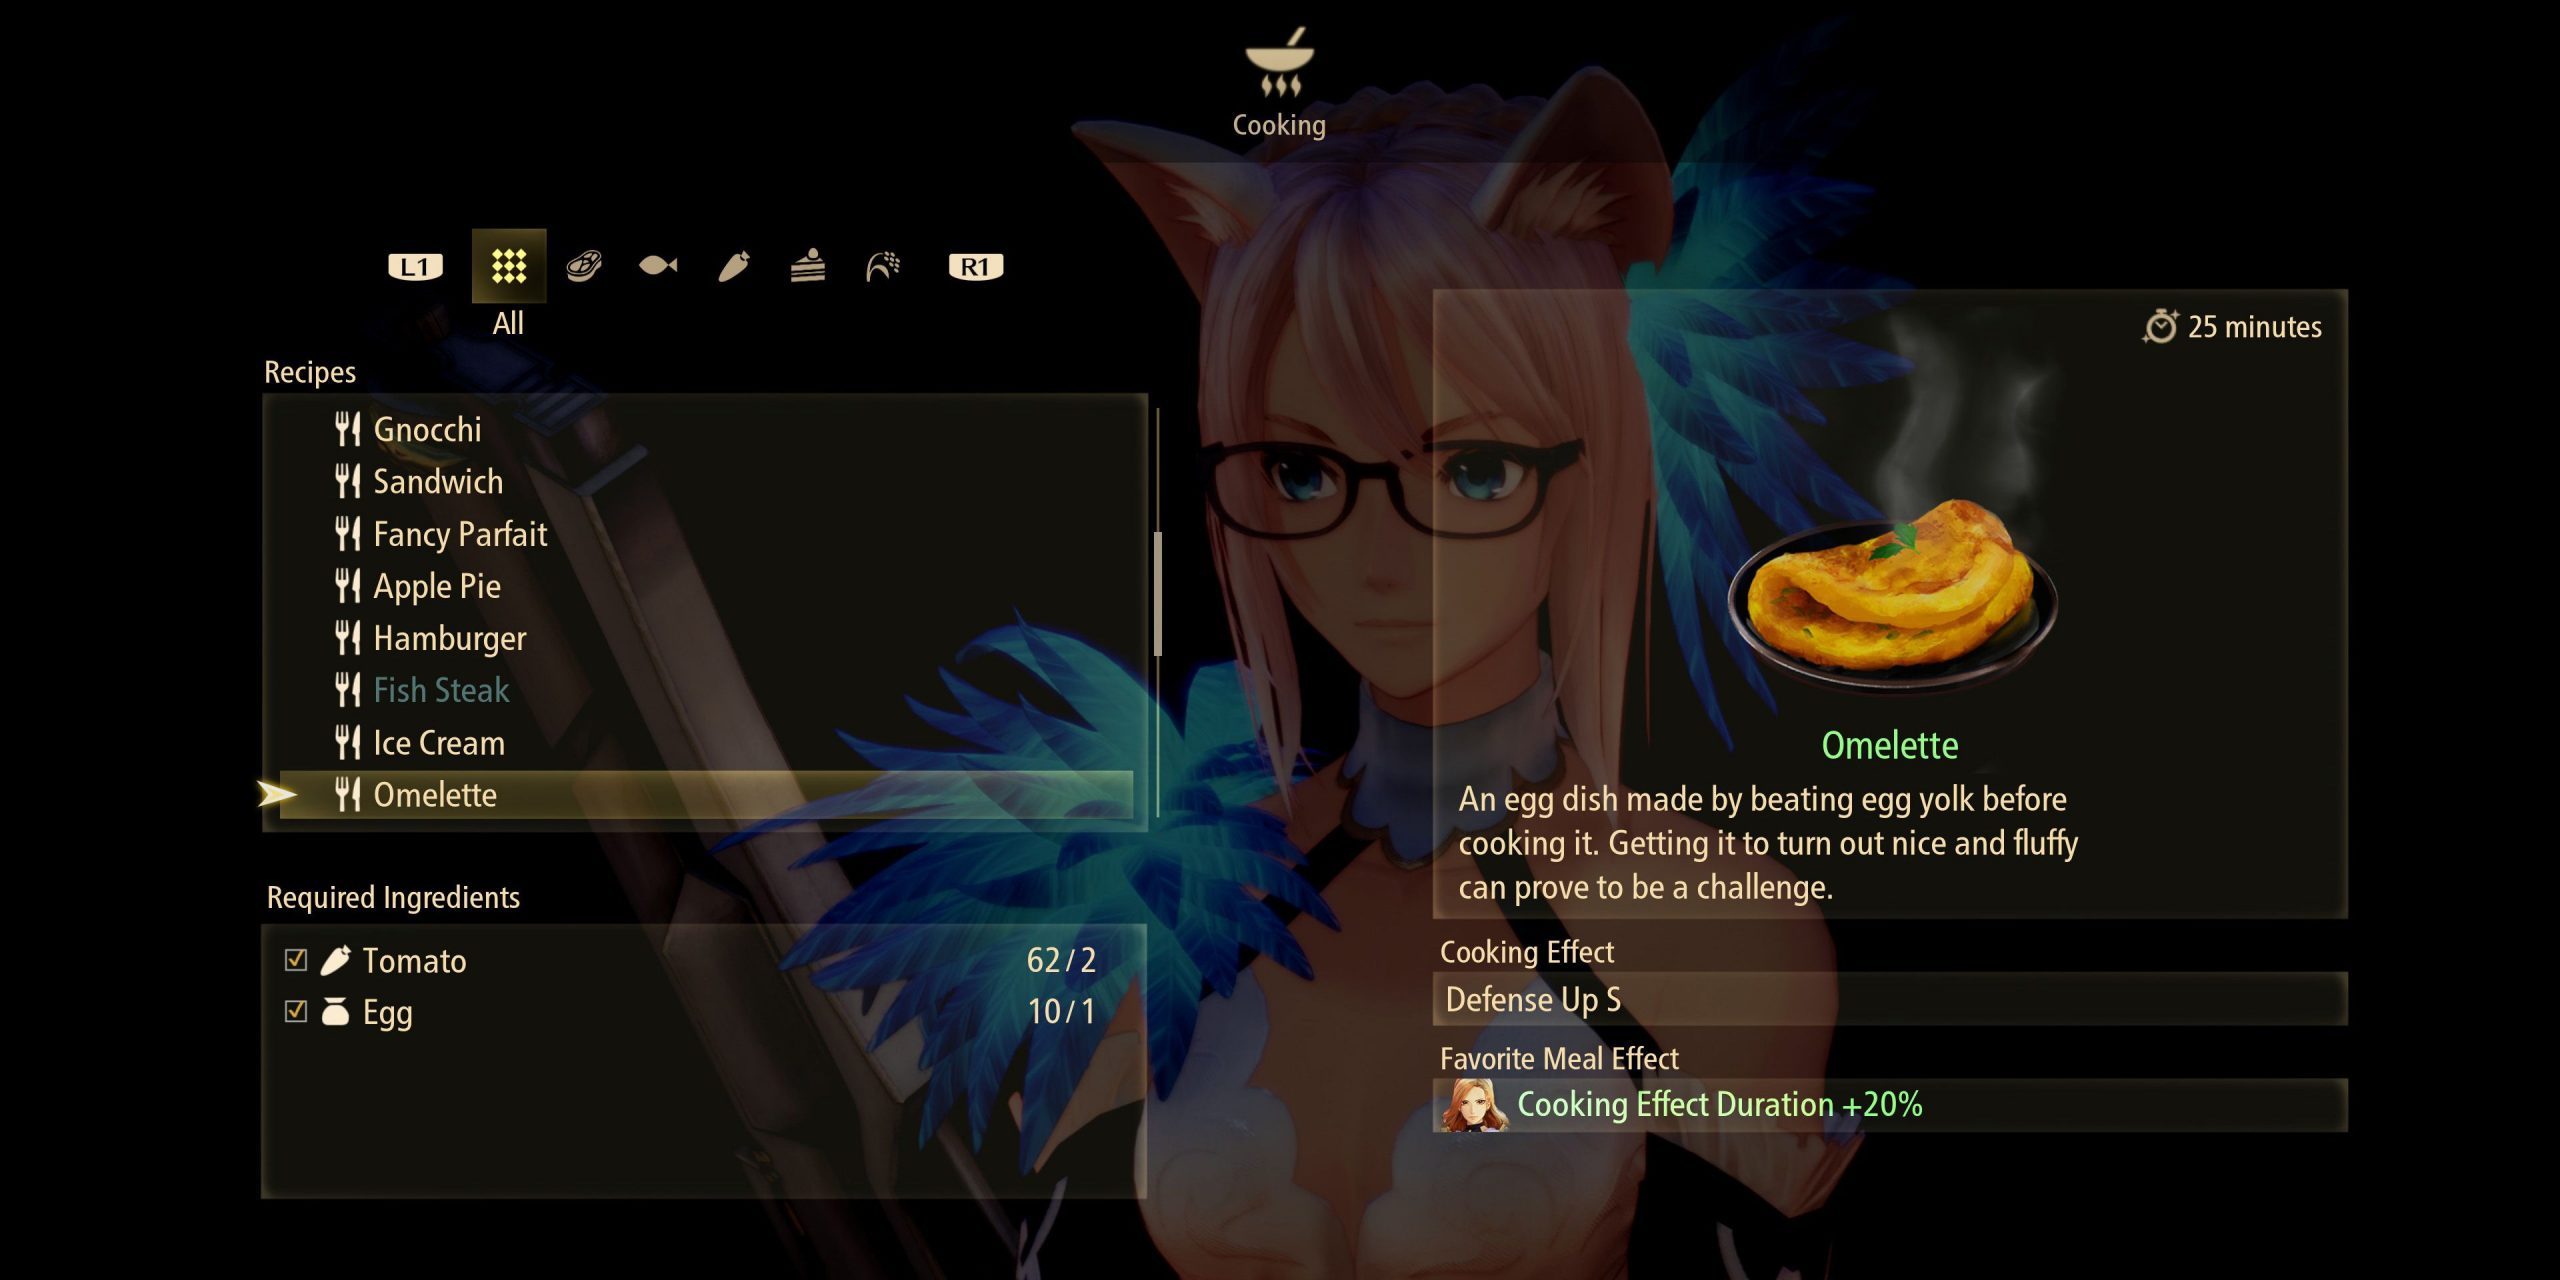 tales-of-arise-cooking-recipes-21-omelette-3453699